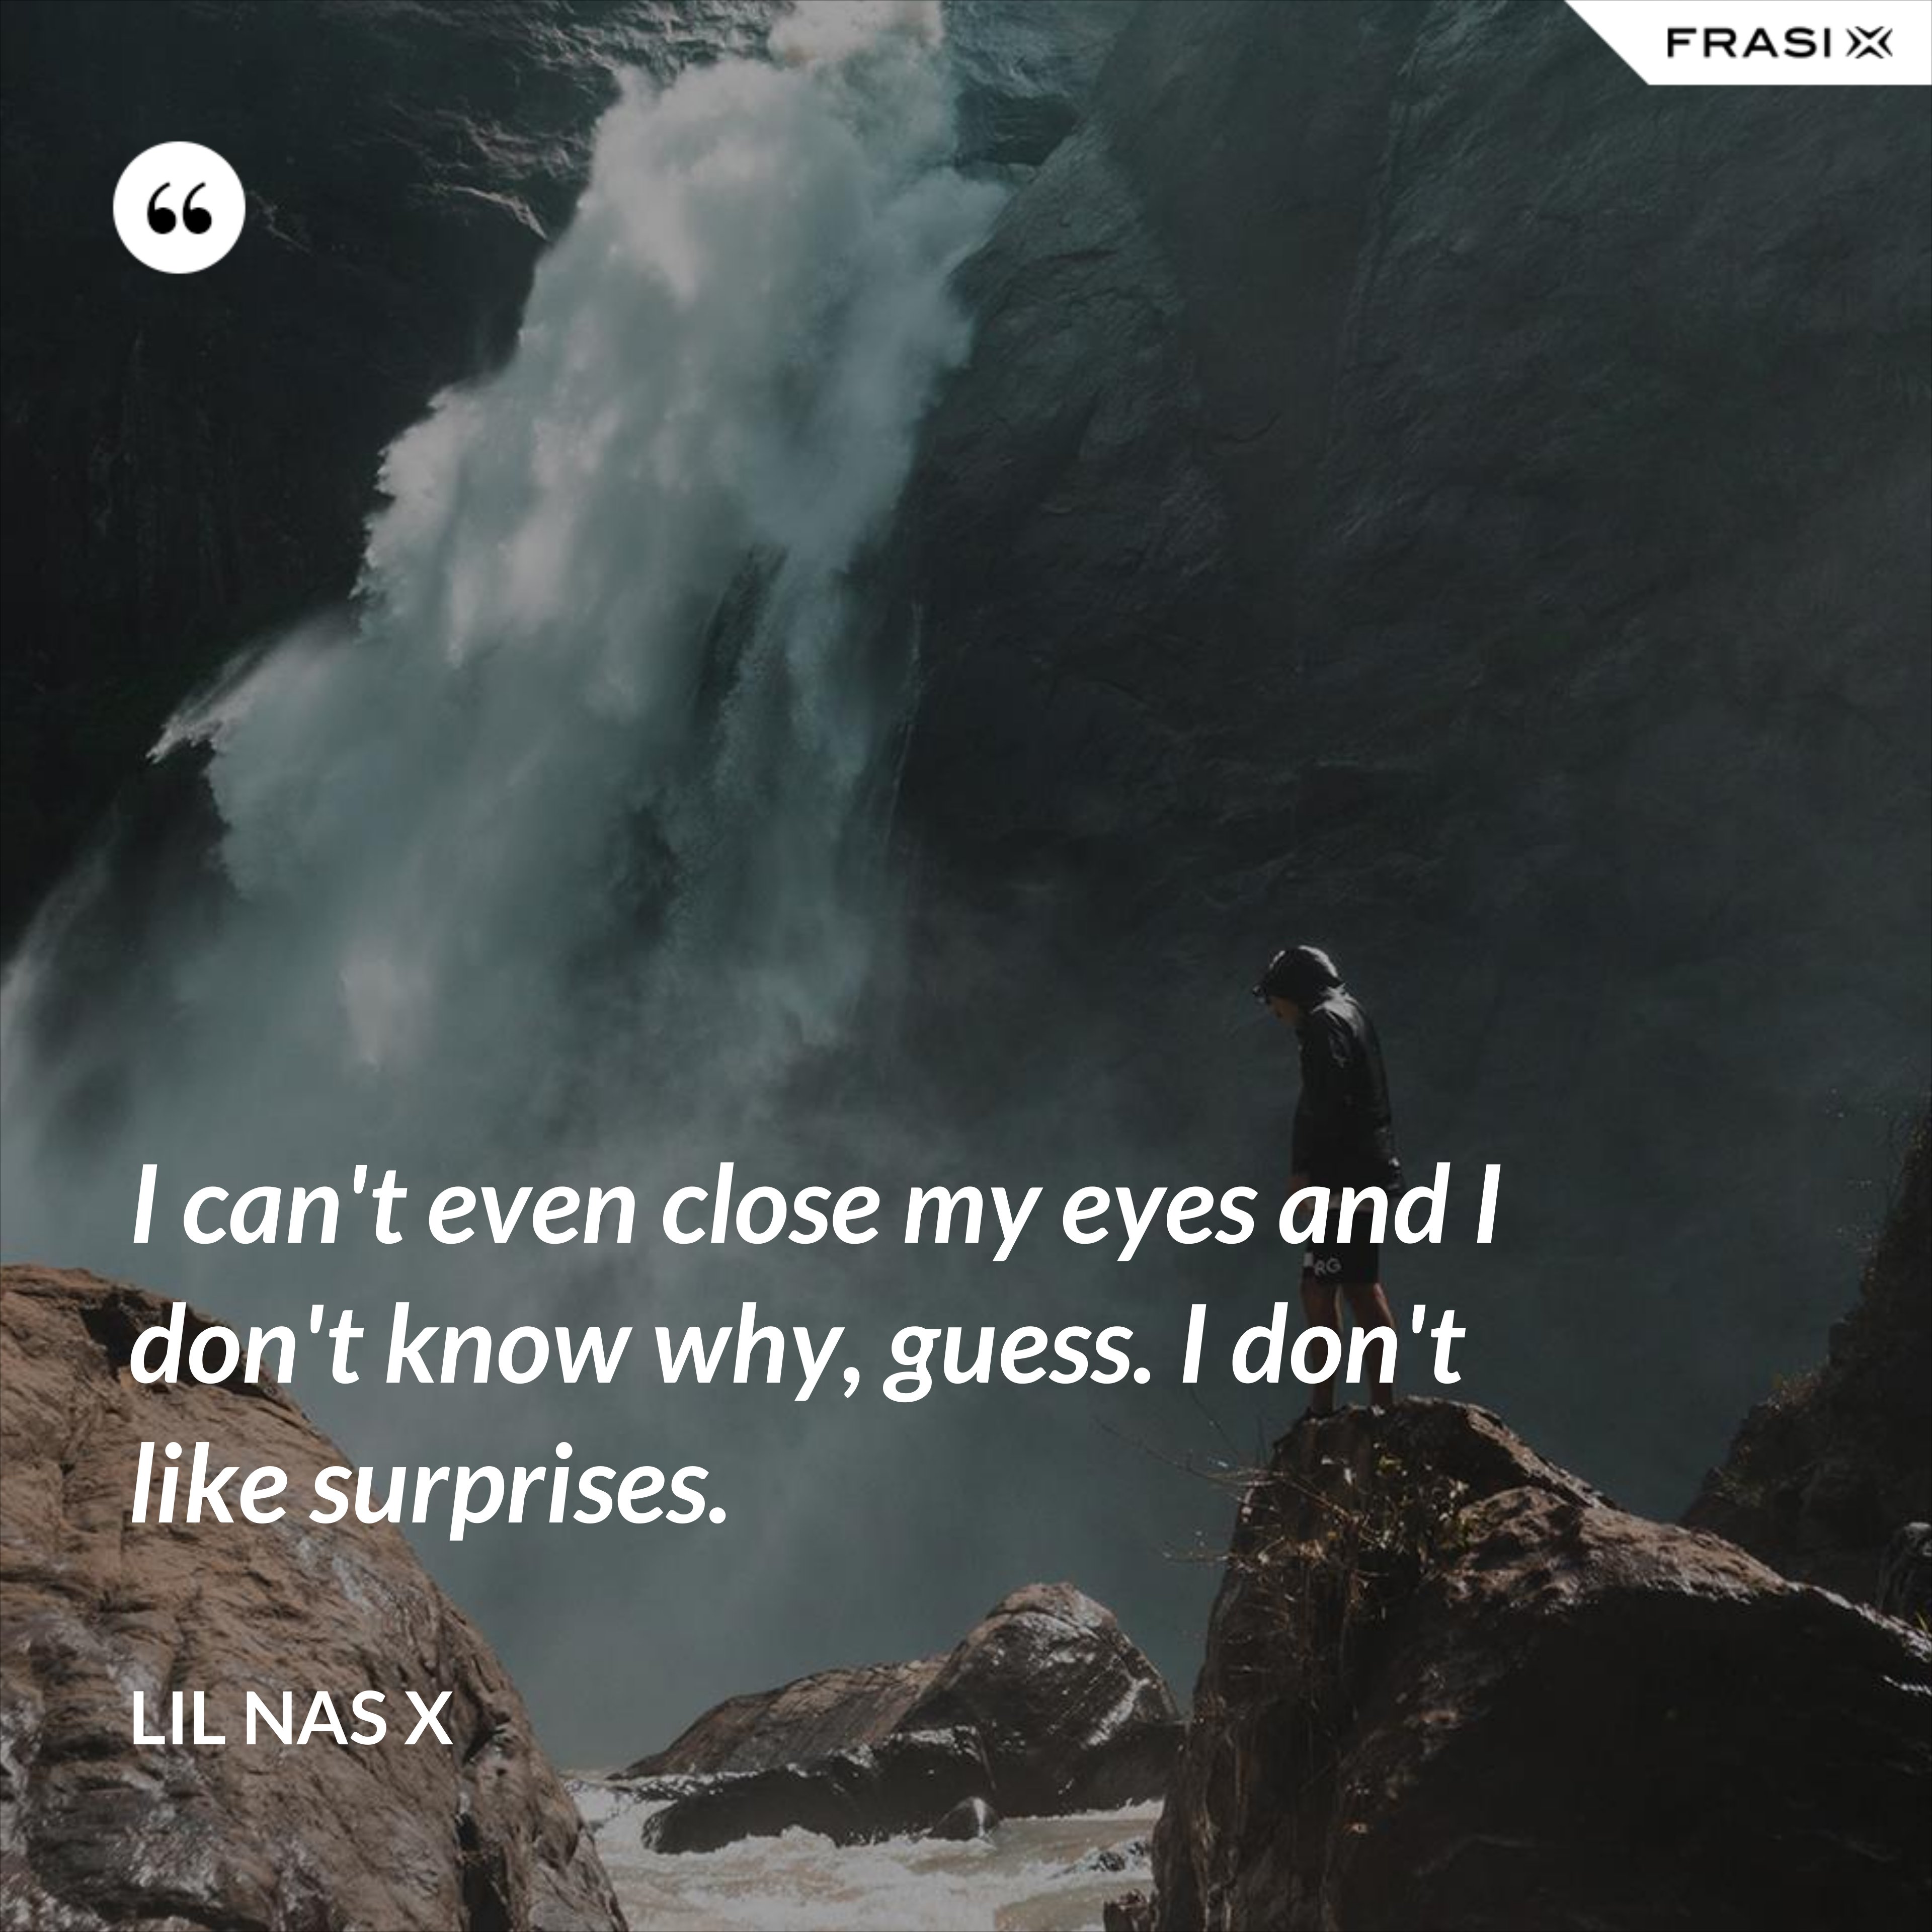 I can't even close my eyes and I don't know why, guess. I don't like surprises. - Lil Nas X